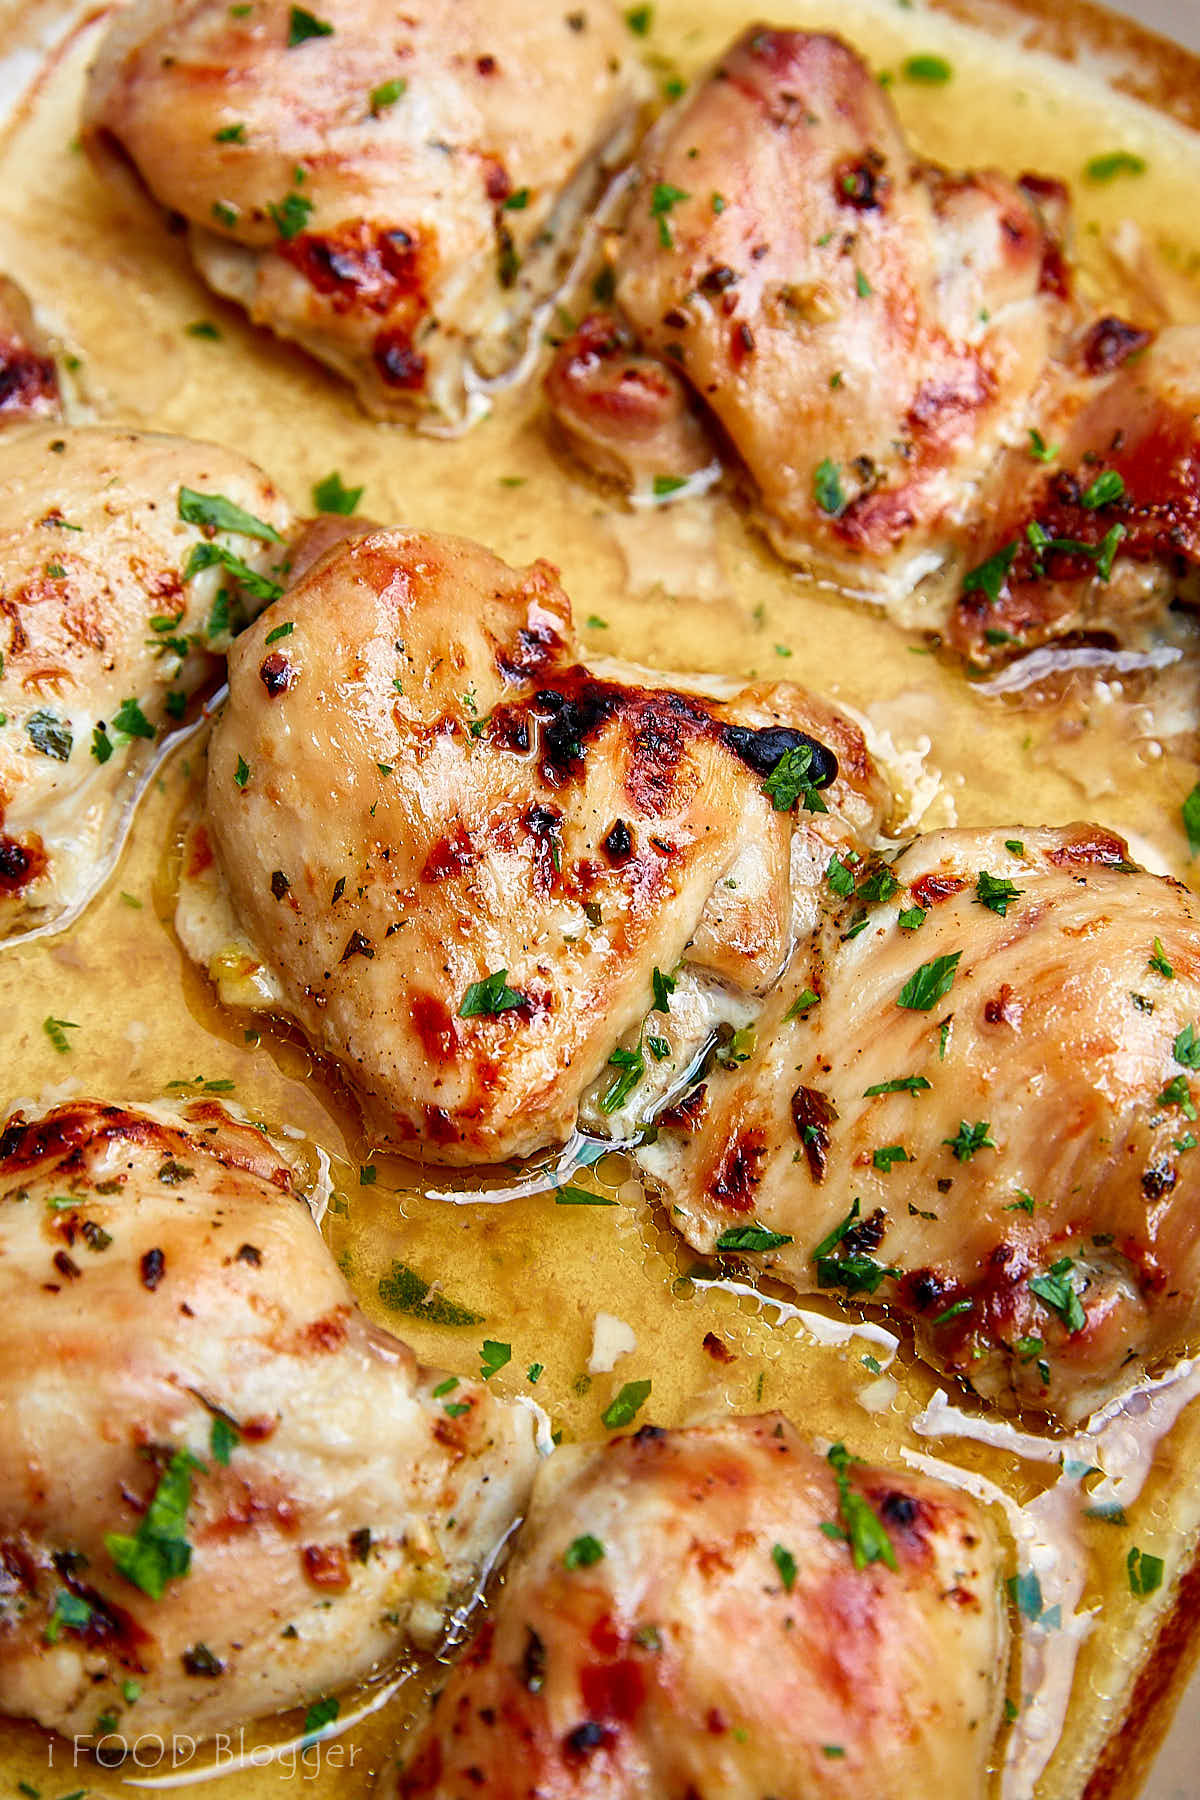 Top 21 Boneless Chicken Thigh Recipe Baked - Home, Family, Style and